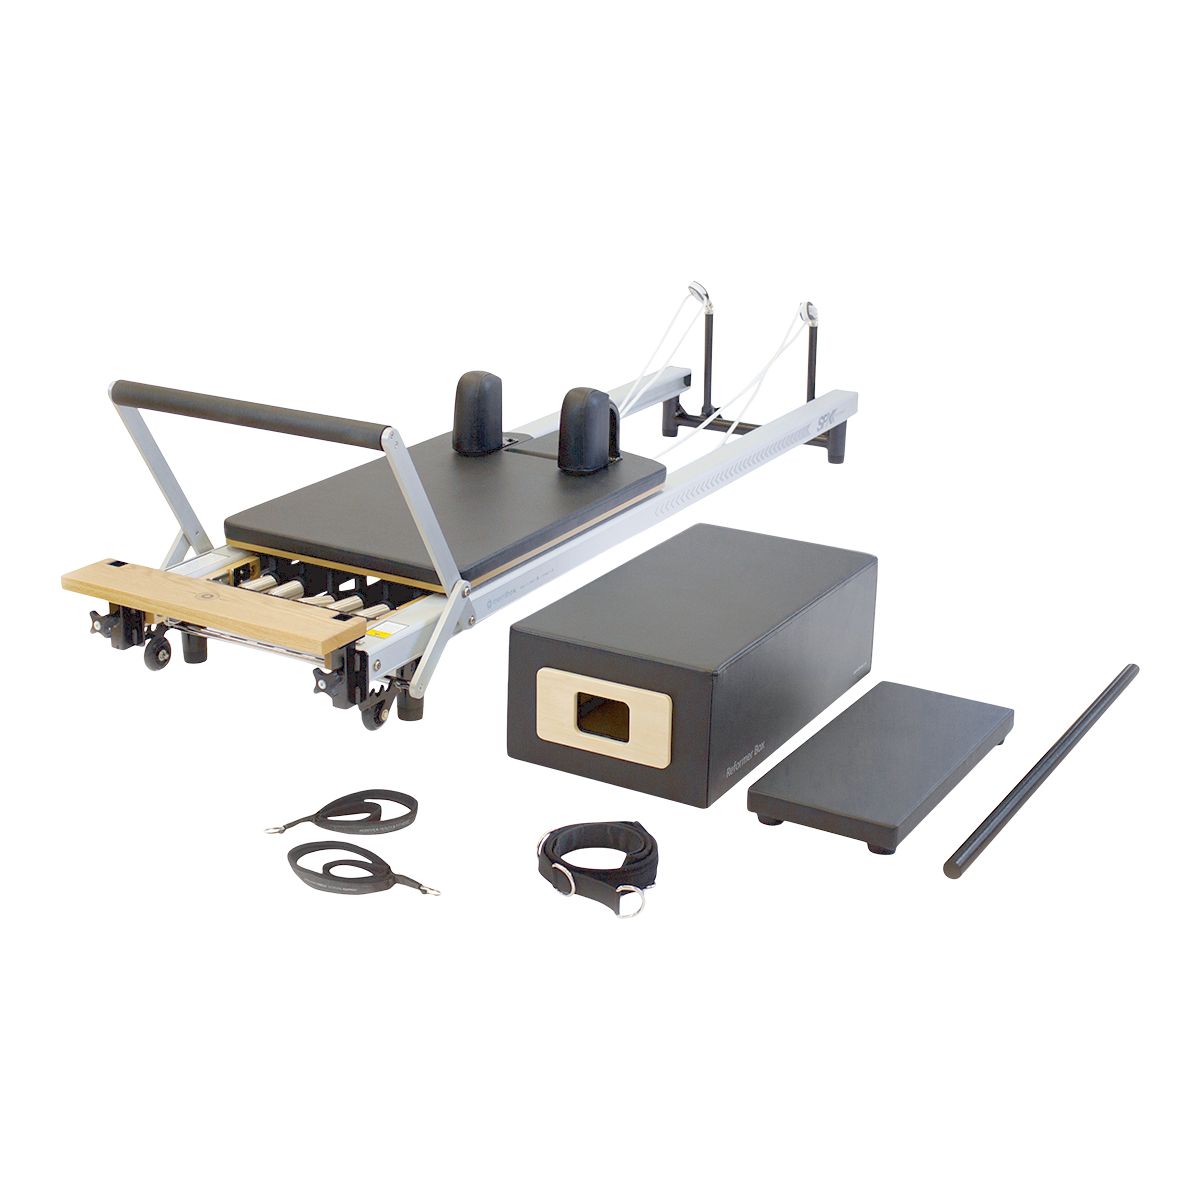 Merrithew At Home SPX Reformer Package